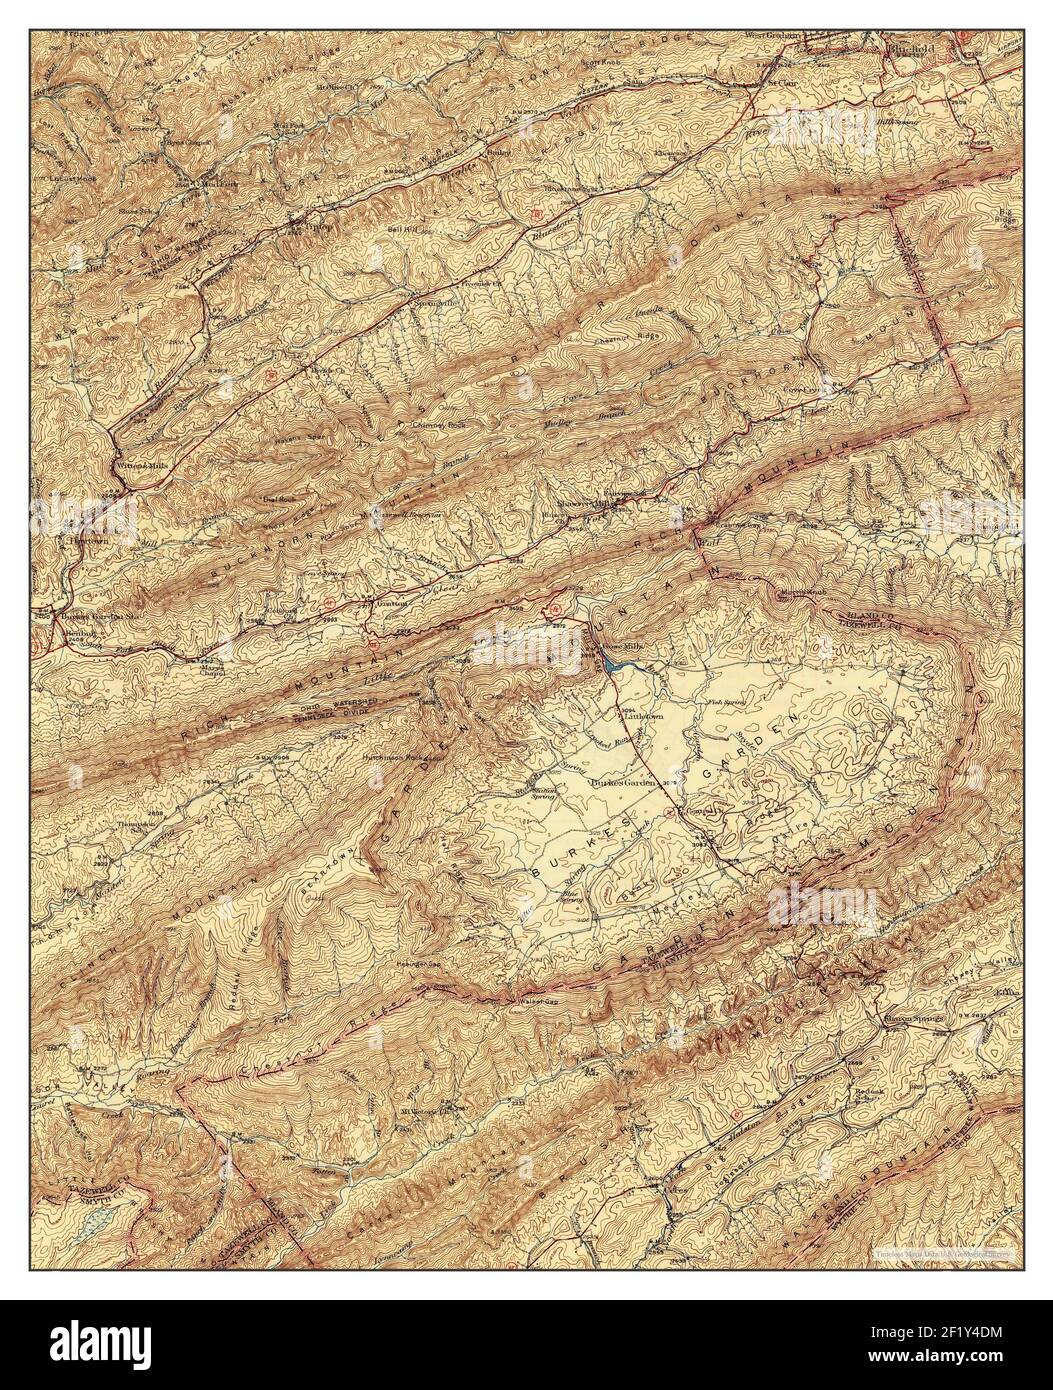 Burkes Garden, Virginia, map 1941, 1:62500, United States of America by Timeless Maps, data U.S. Geological Survey Stock Photo